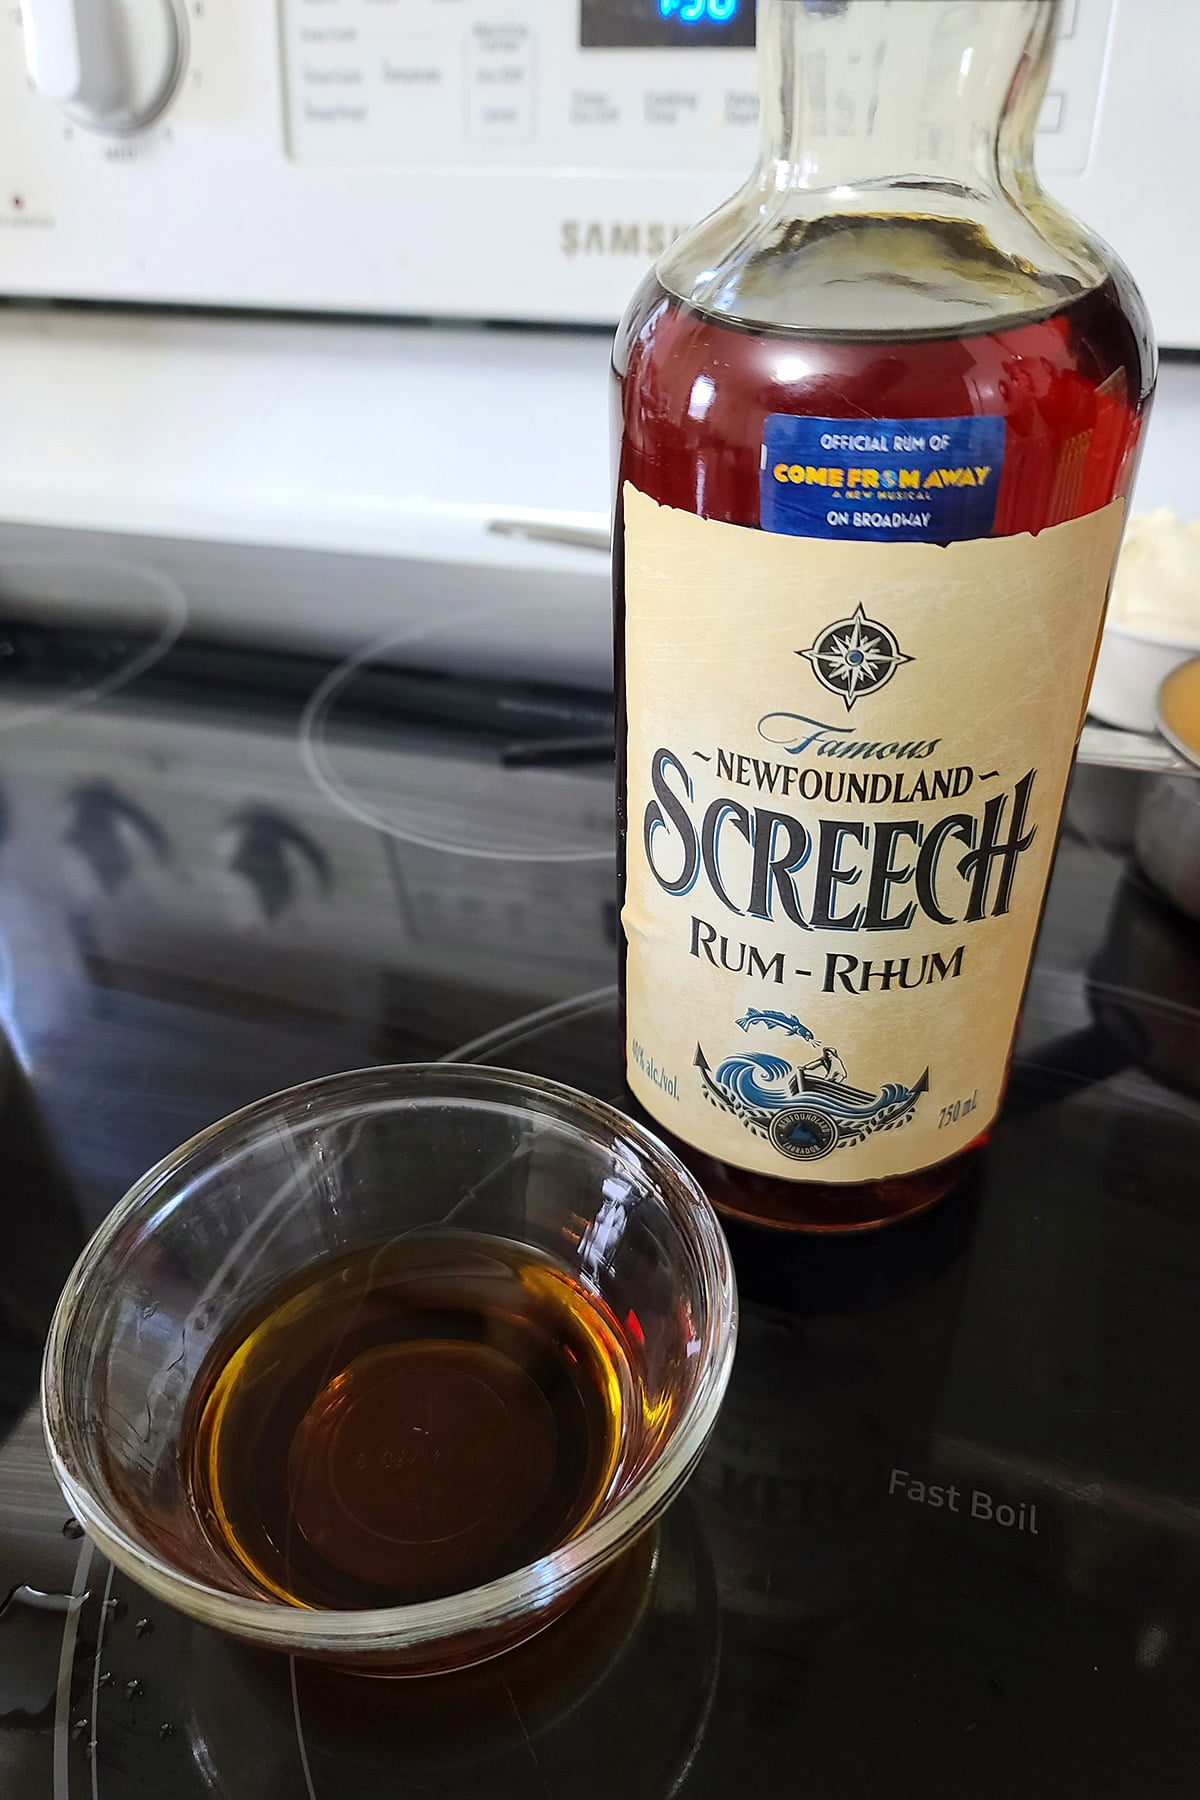 A bottle of Screech rum, behind a small glass bowl with rum in it.